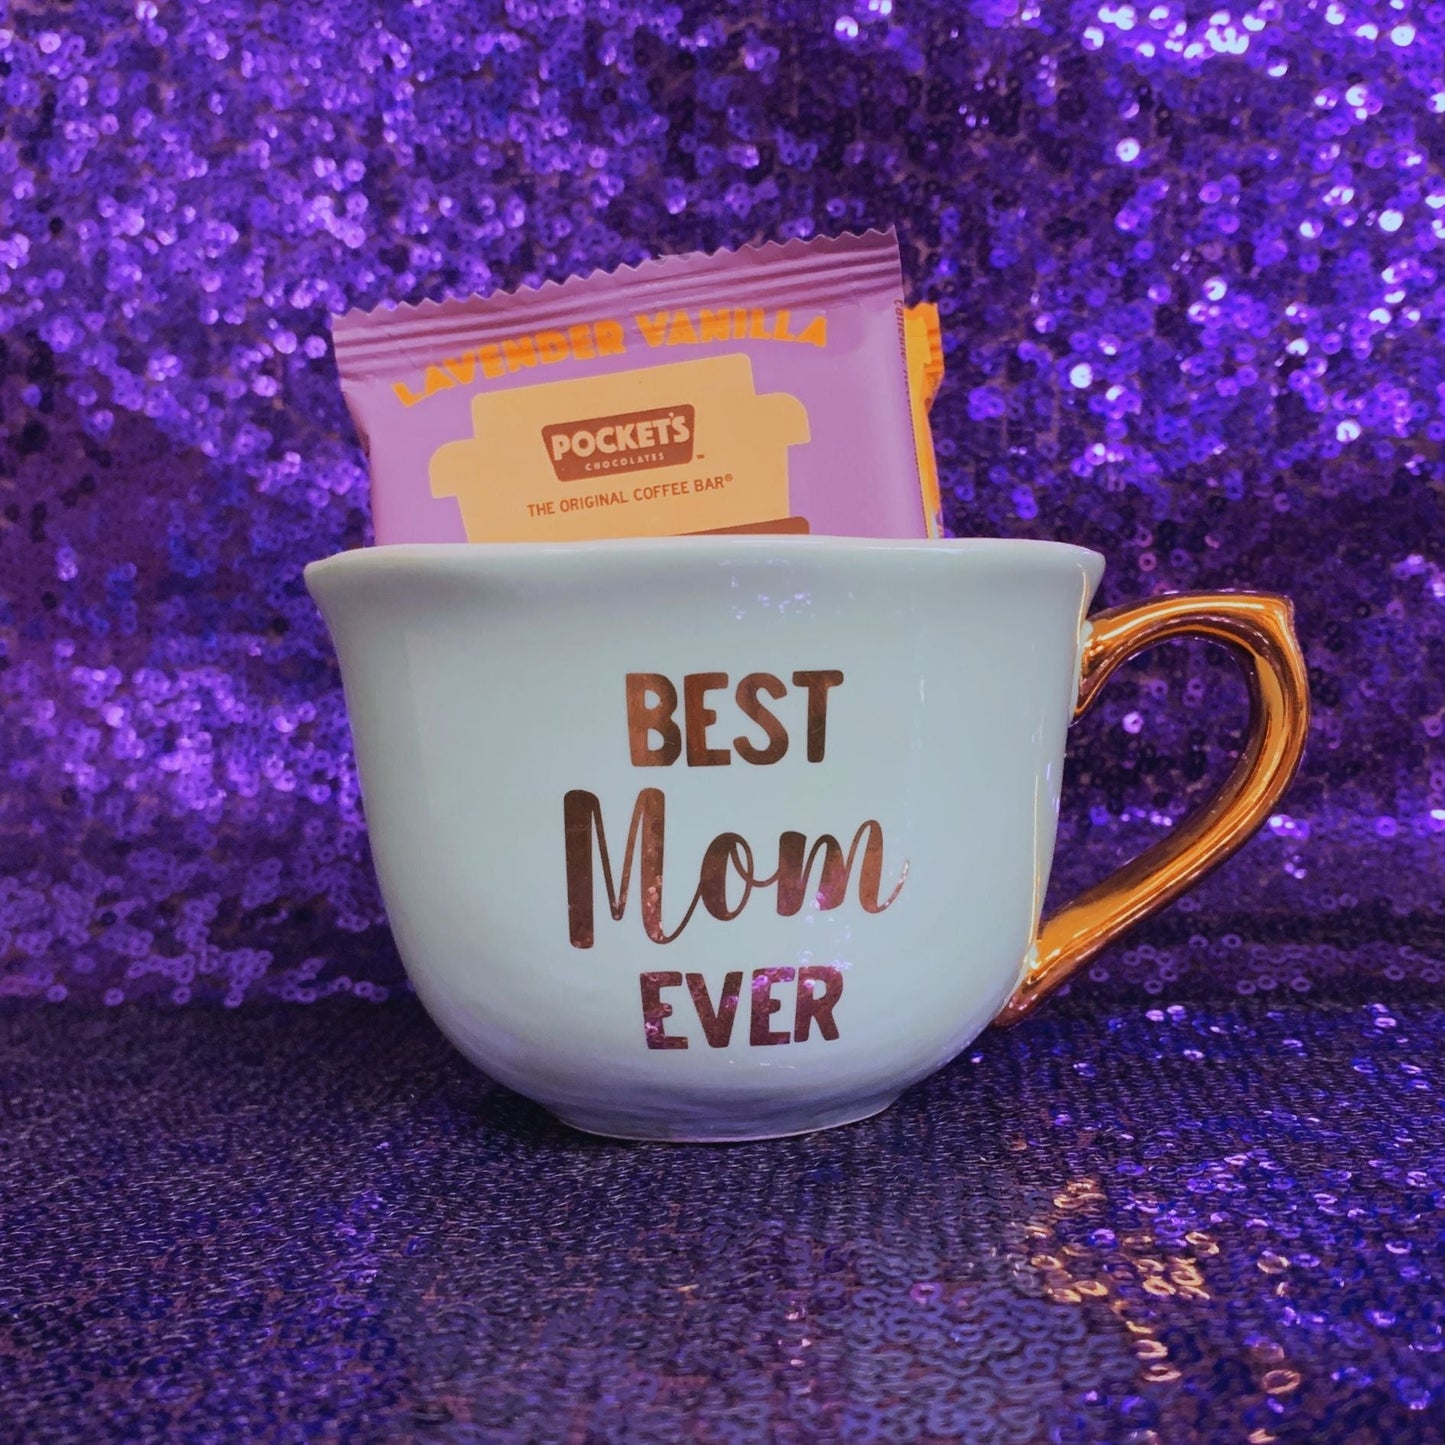 Best Mom Ever Teacup Filled with Coffee Chocolates